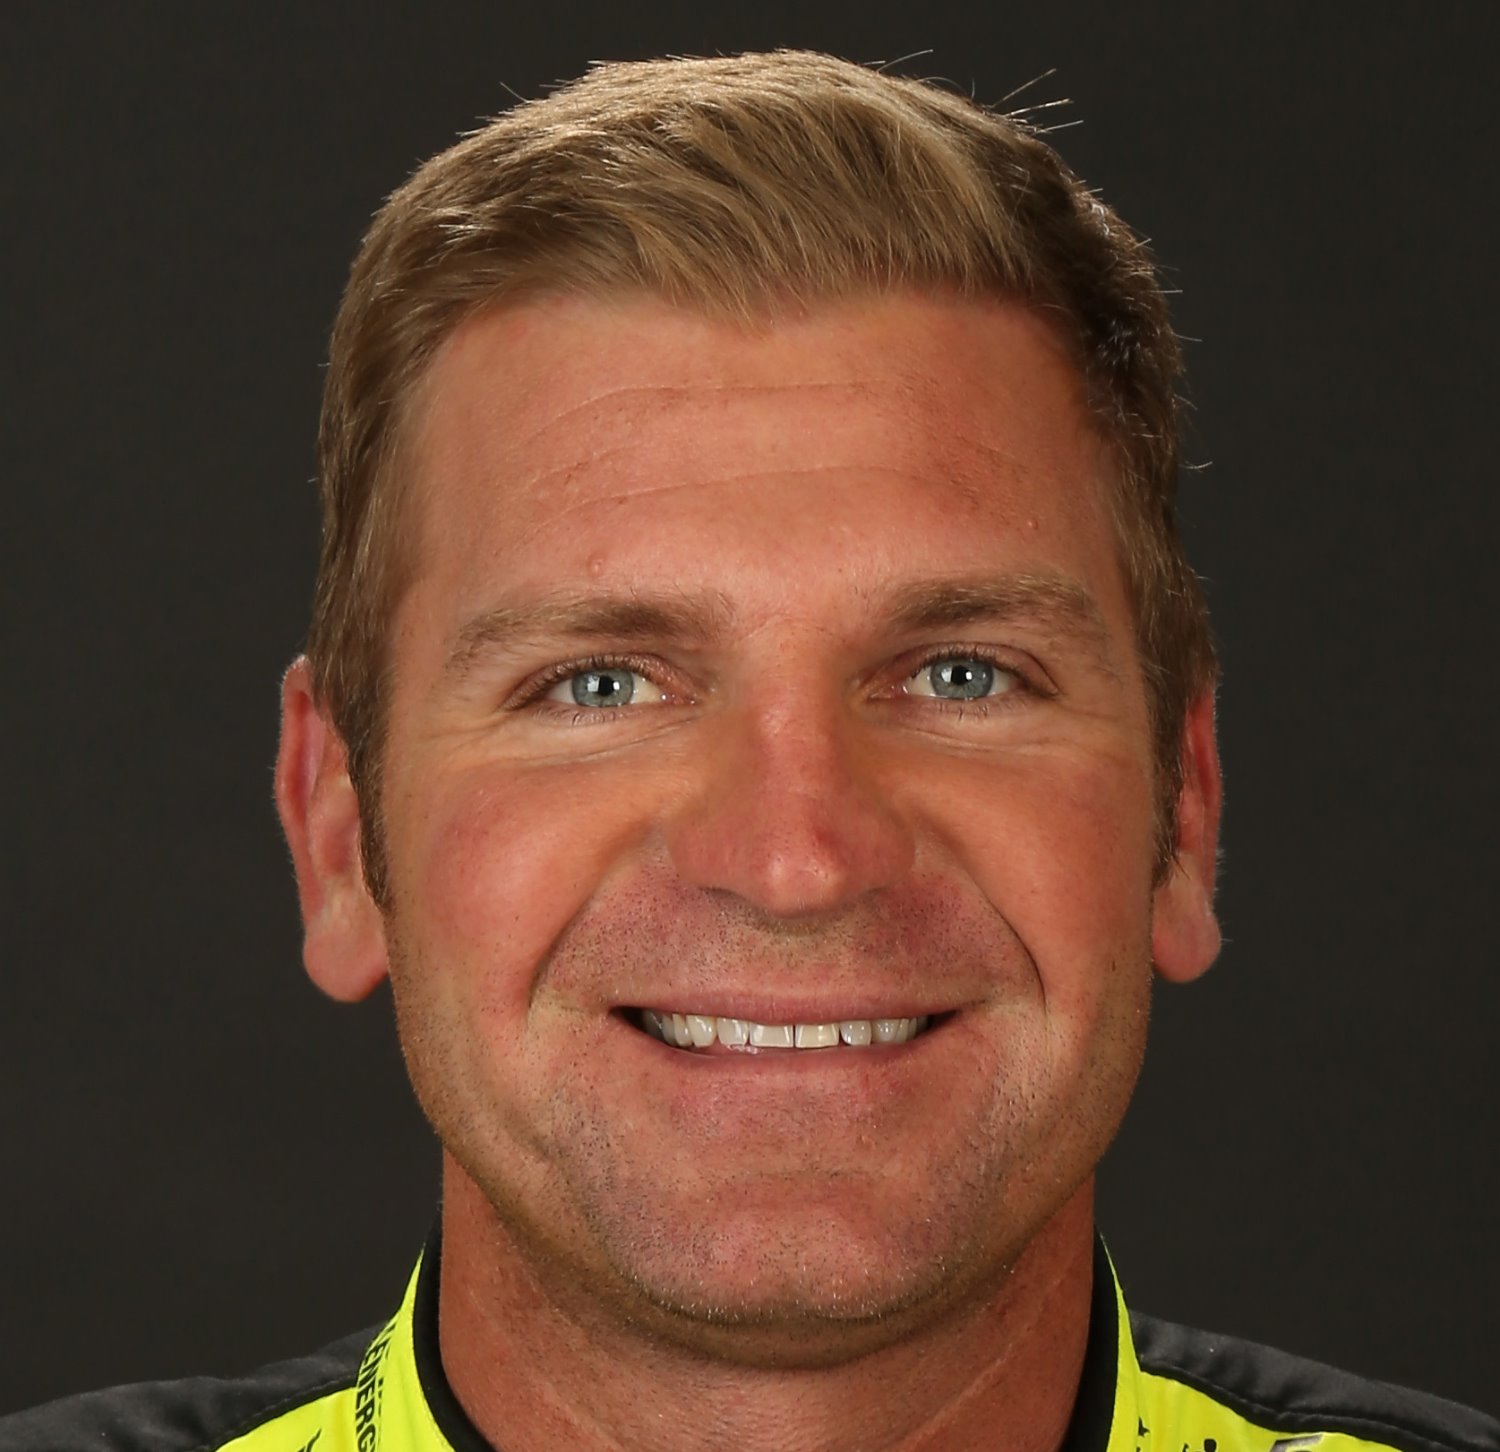 AR1 was able to exclusively obtain this rare photo of Clint Bowyer at a time he was not spouting exletives